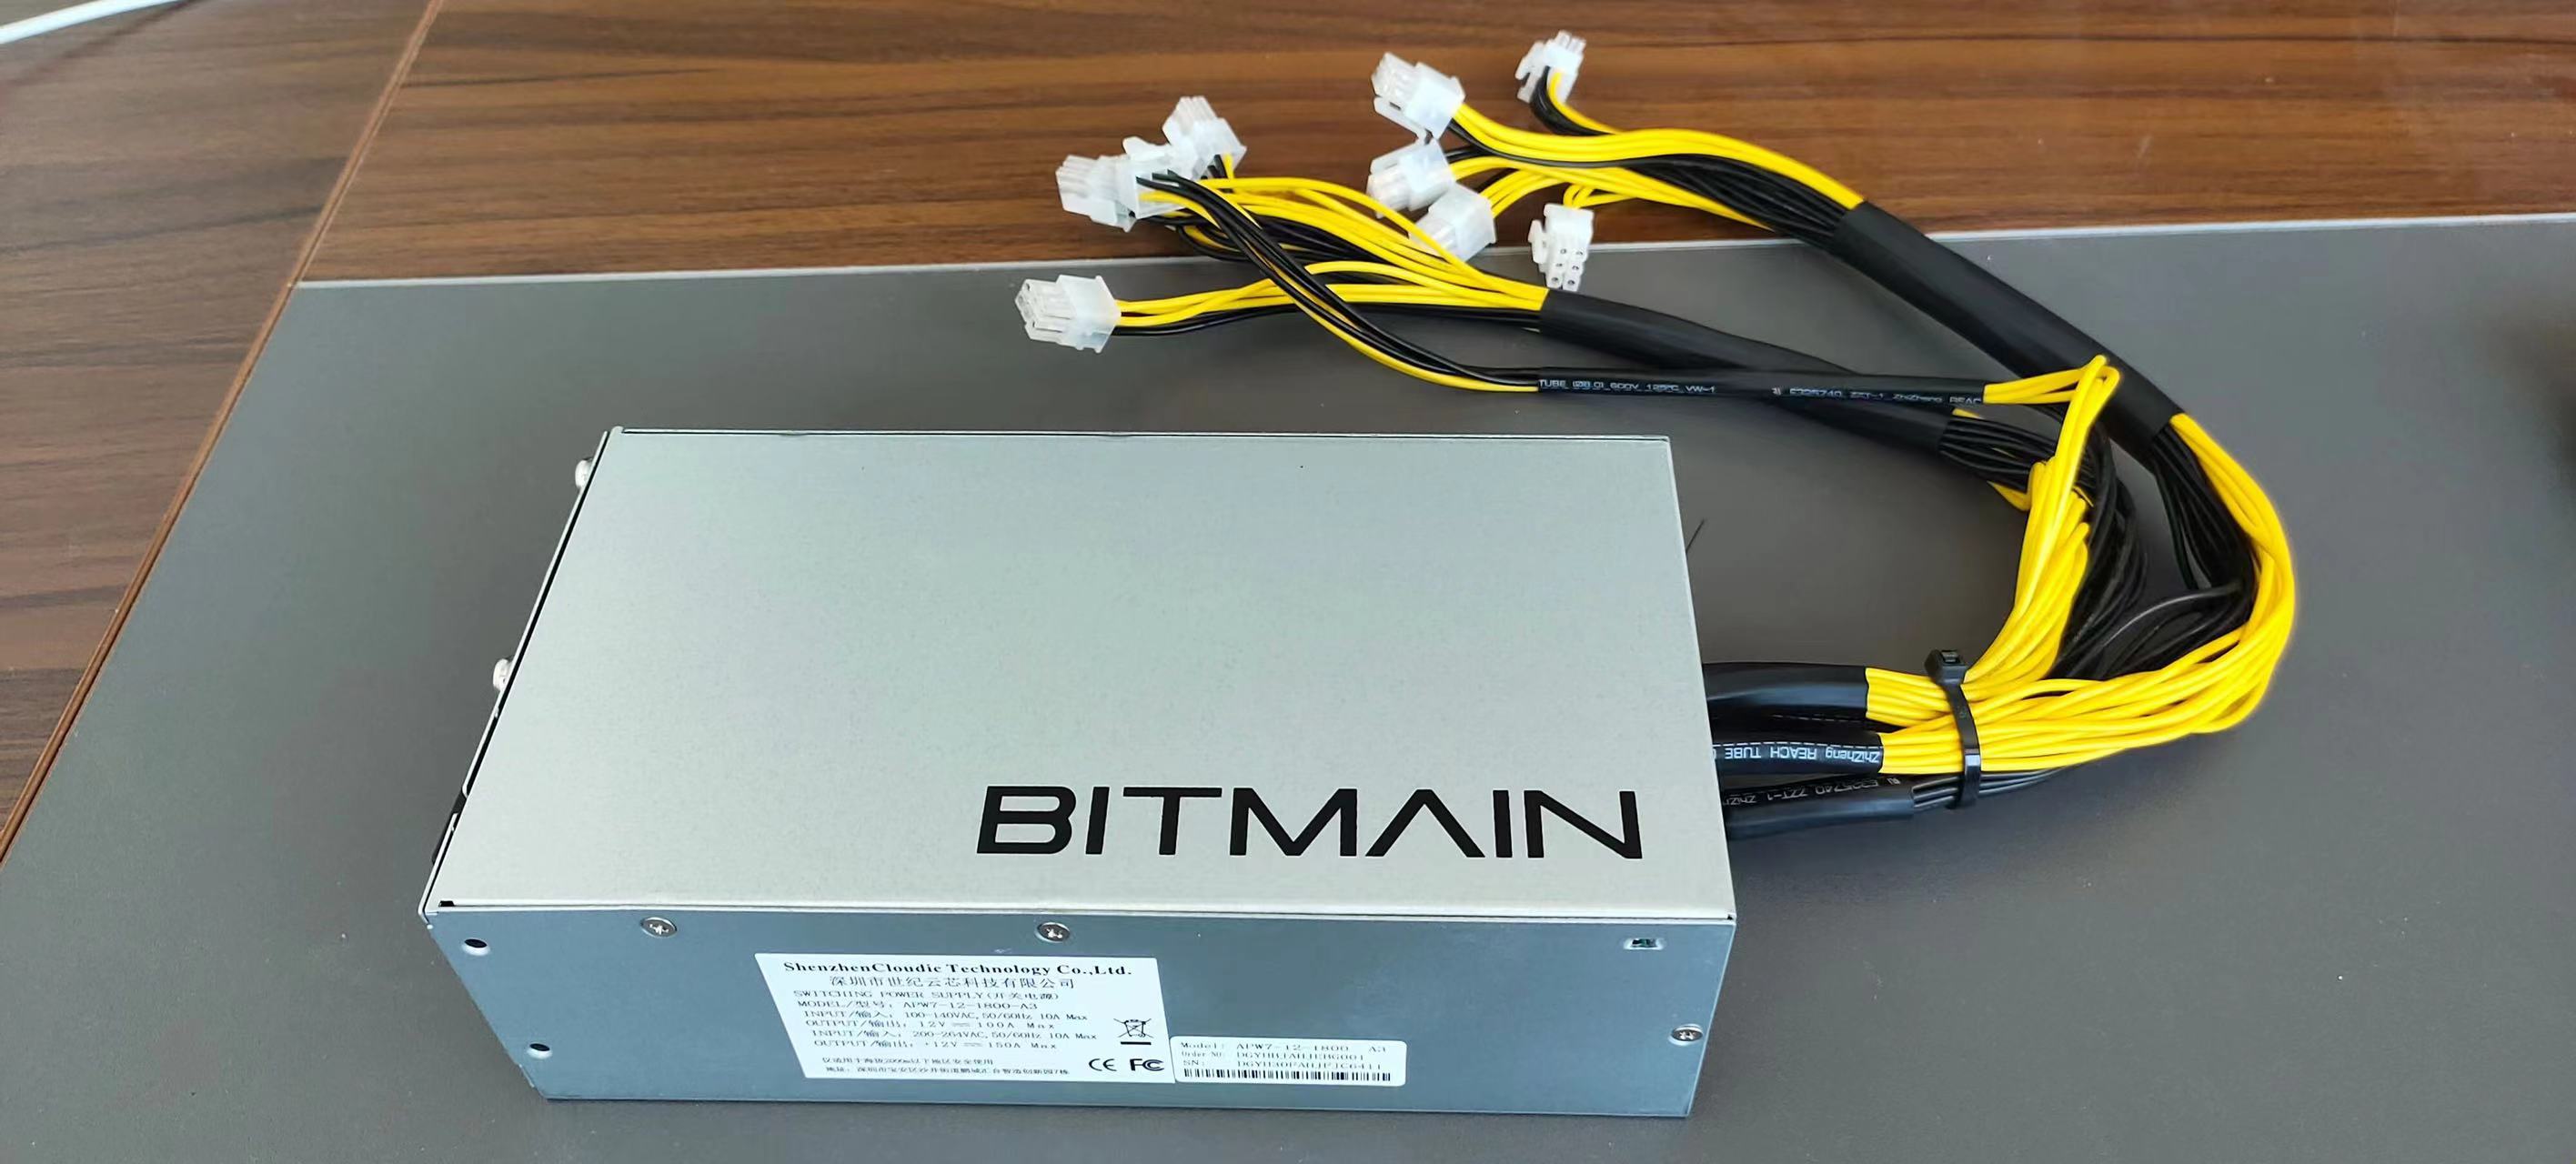 Bitmain GENUINE Antminer Power For GPU miner Supply APW7 PSU 1800w 110v 220v New Model for S9 or L3+ or Z9 Mini or D3 ASICs w/ 10 Connectors